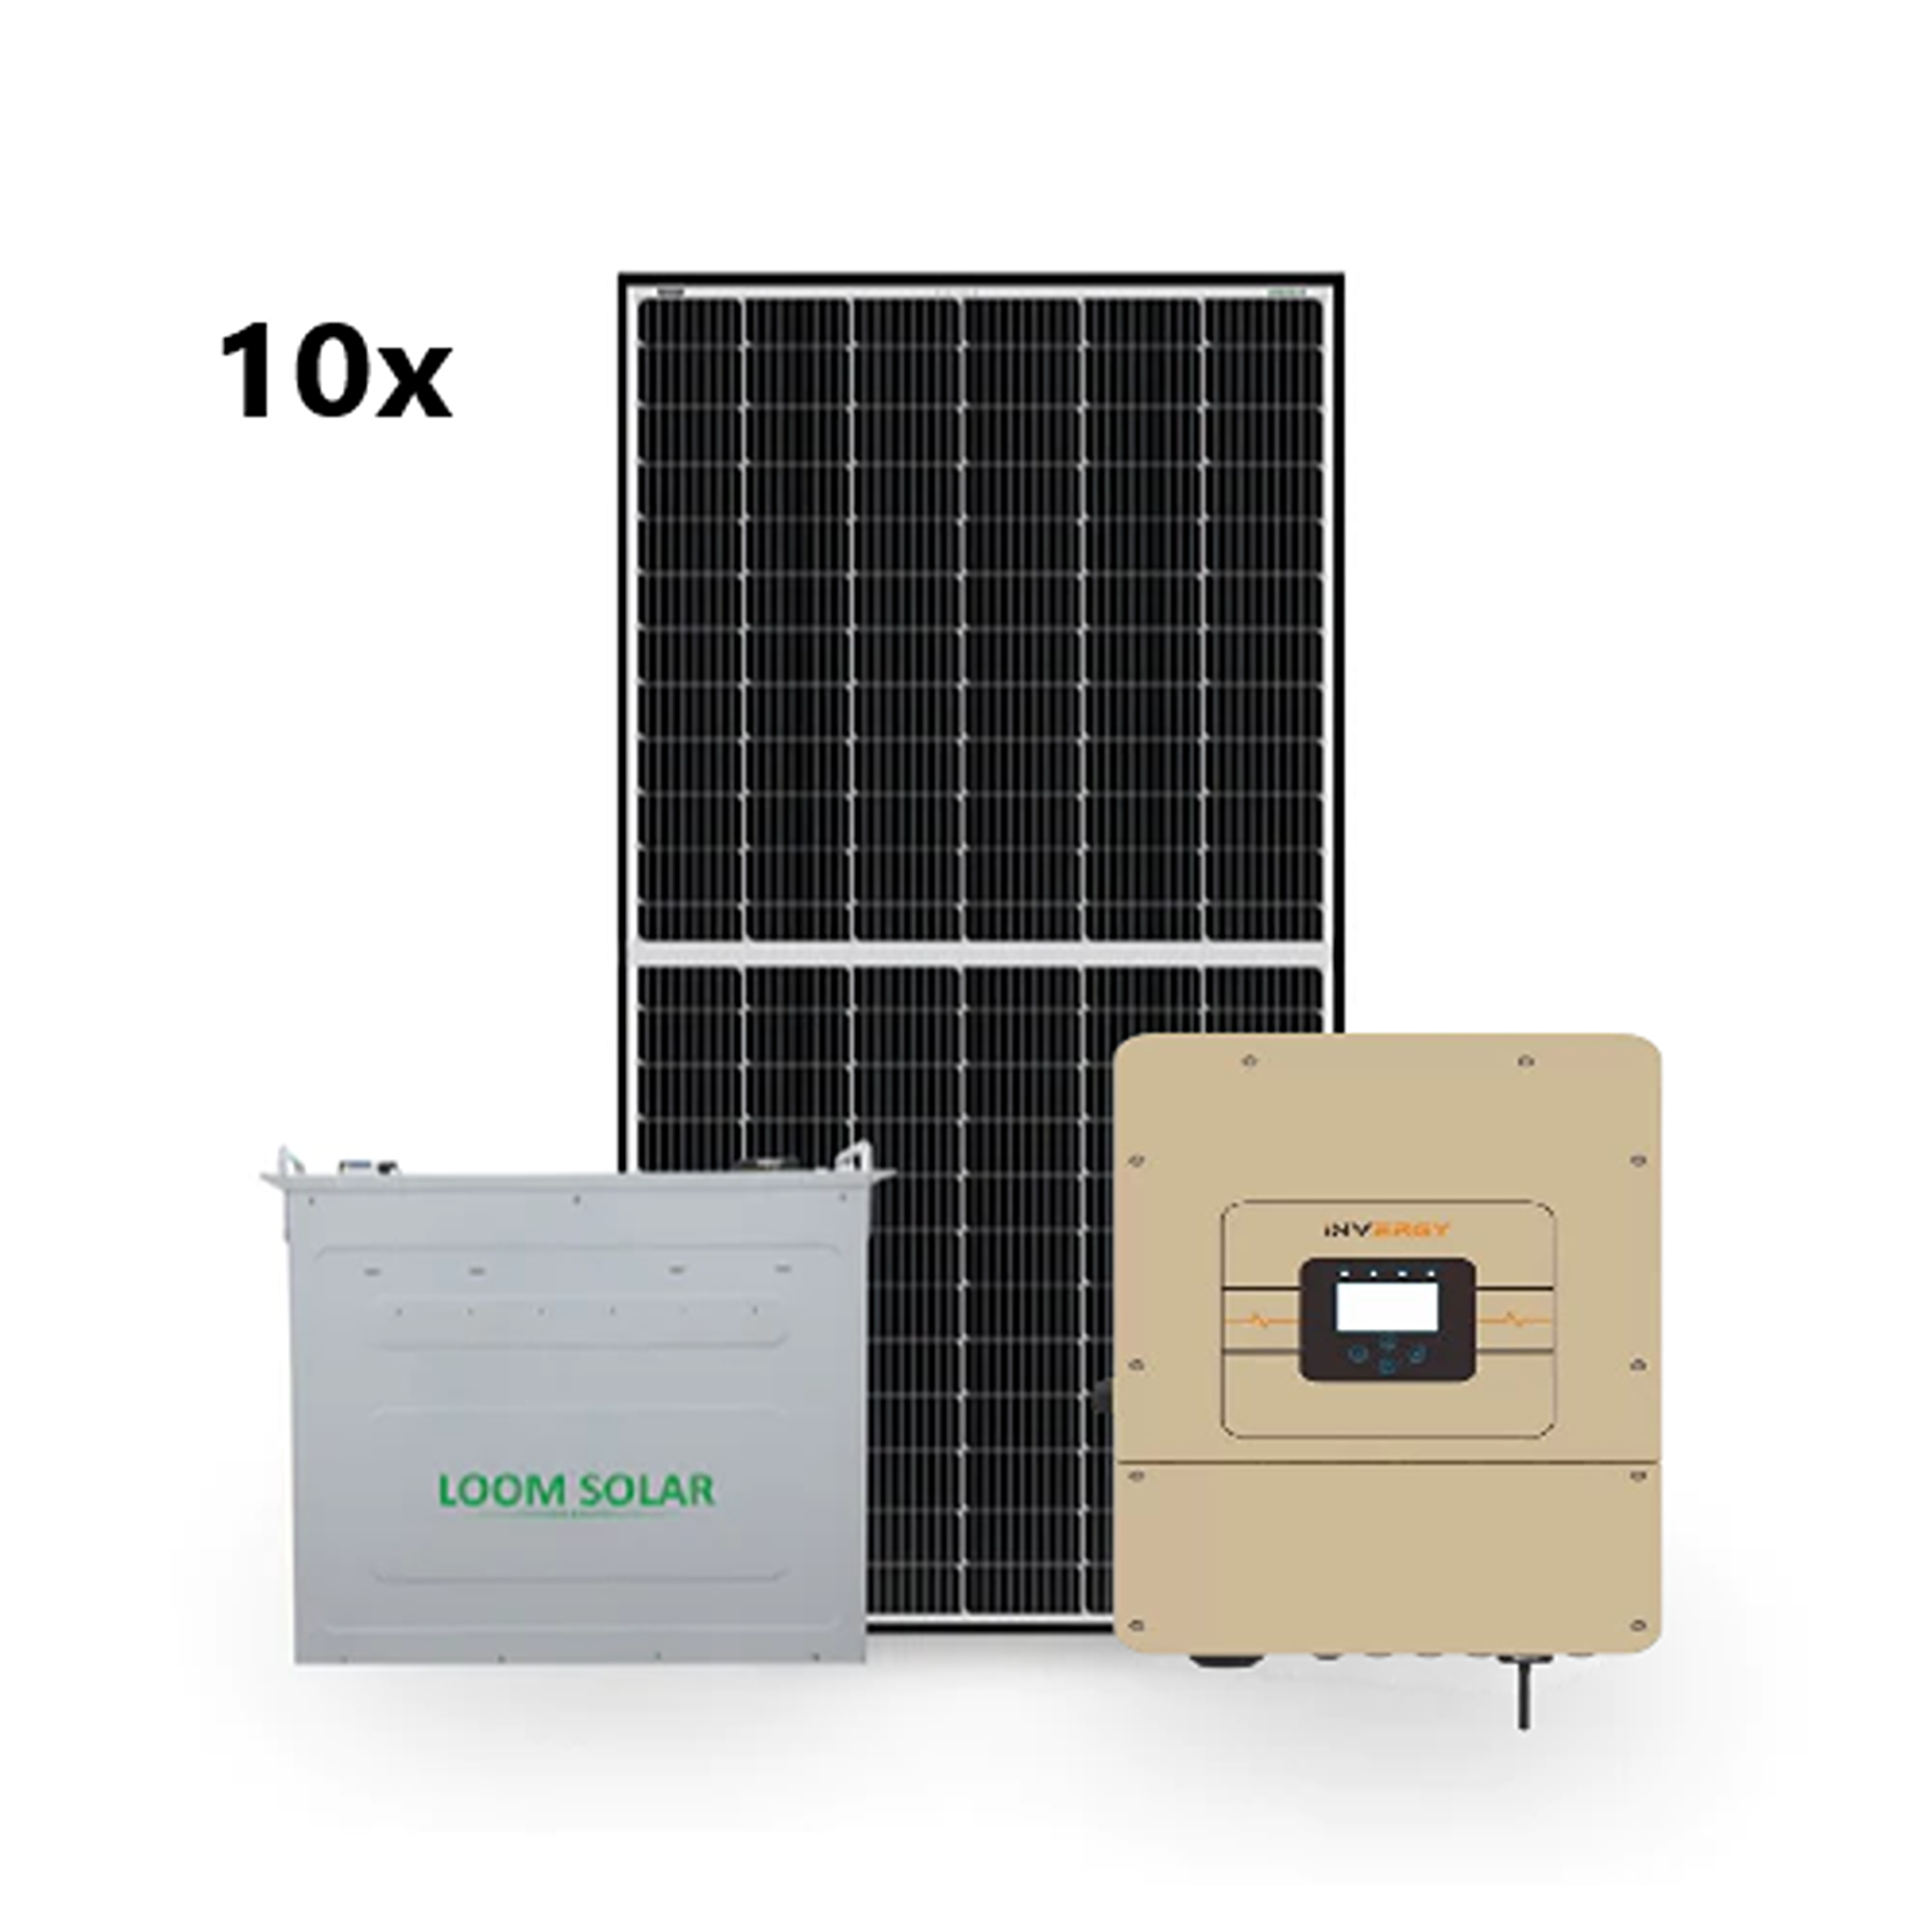 5kW Hybrid Solar System for Homes, Small Office, Shops